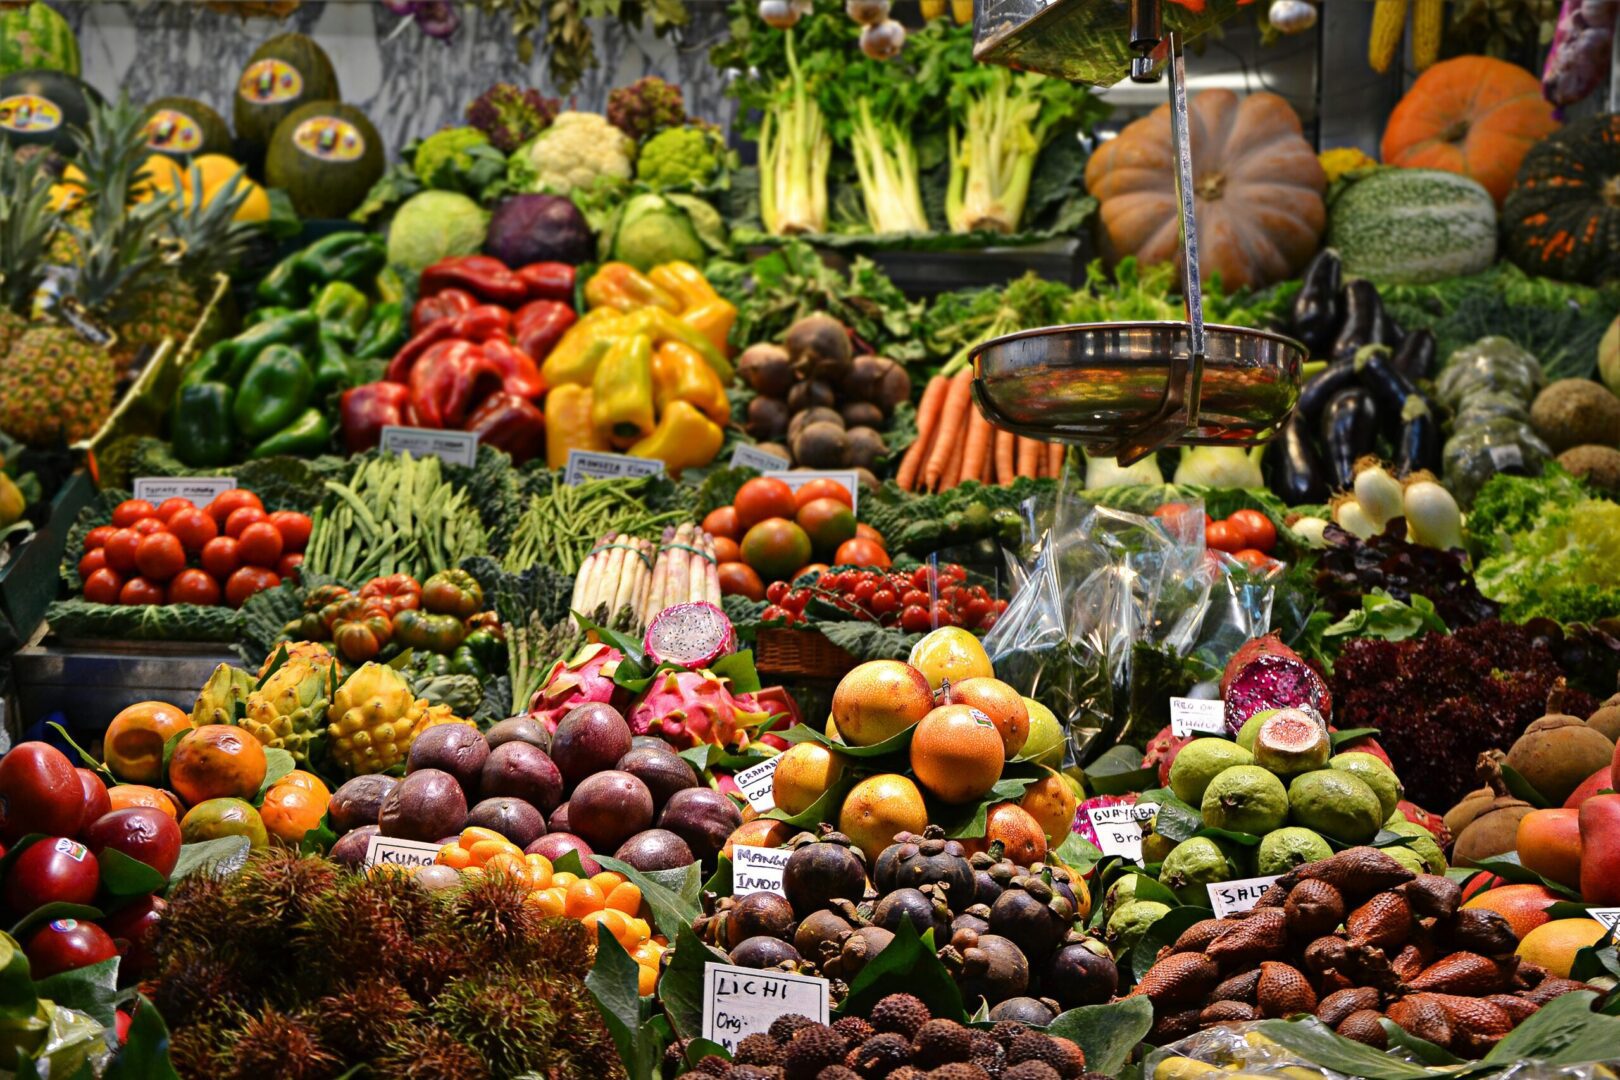 A display of fruits and vegetables.